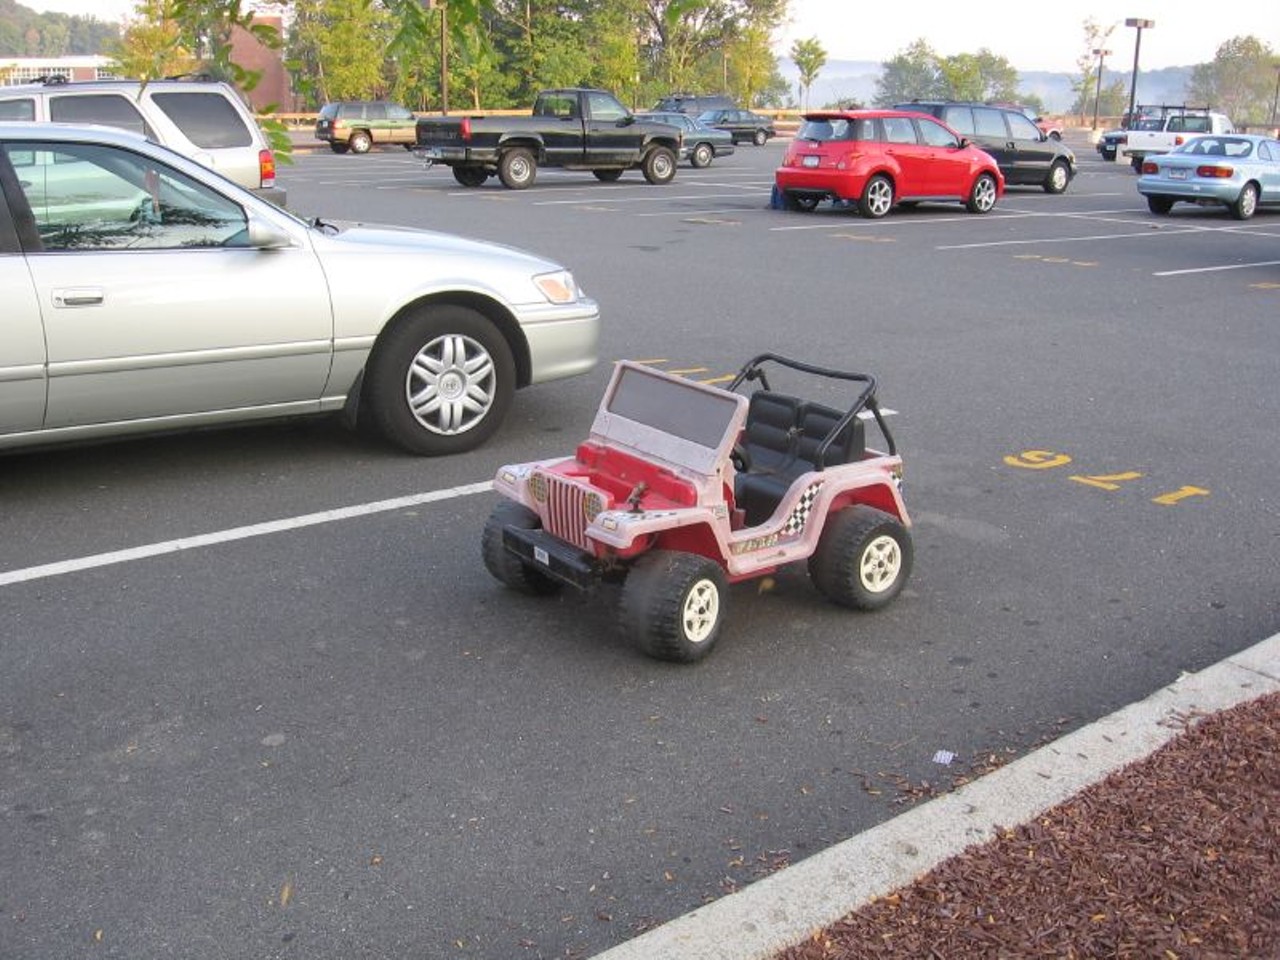 Power Wheel cars may not be driven down the street (Canton) 
The electric kids car, Power Wheels, is forbidden from being driven down the street in North Canton . . . 
Photo via Will White/Flickr